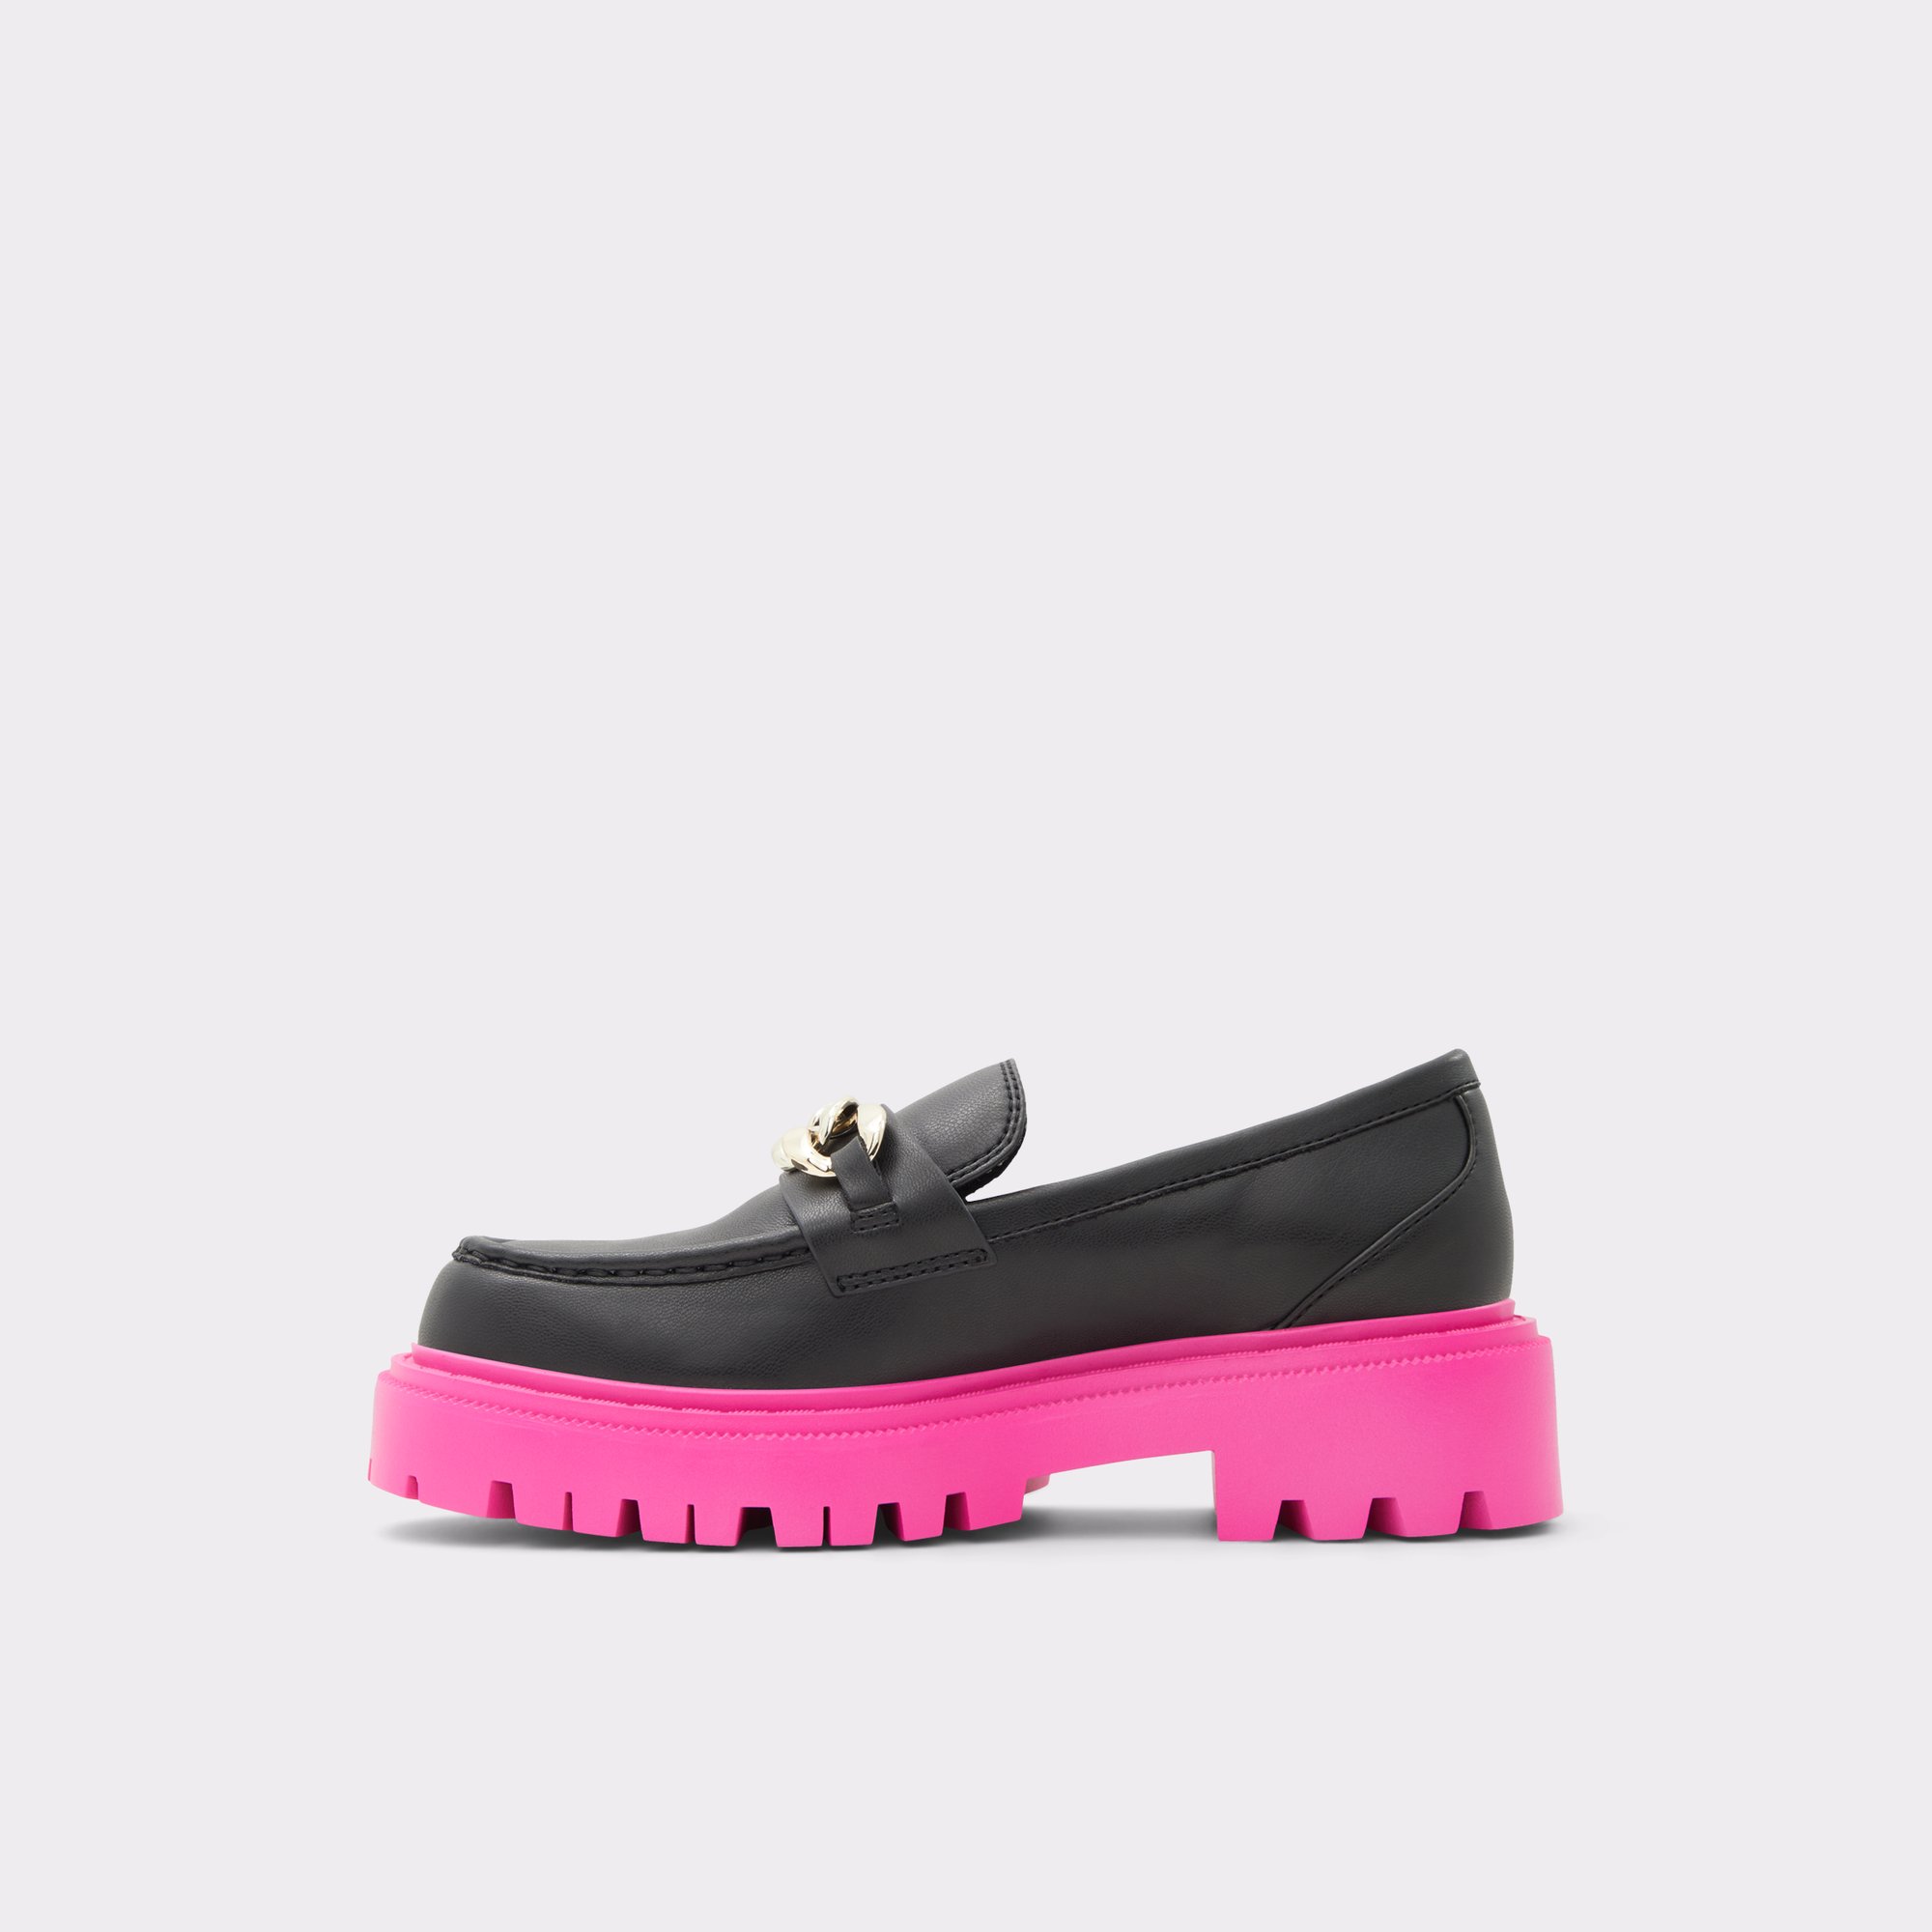 Brixton Black Synthetic Smooth Women's Loafers & Oxfords | ALDO US